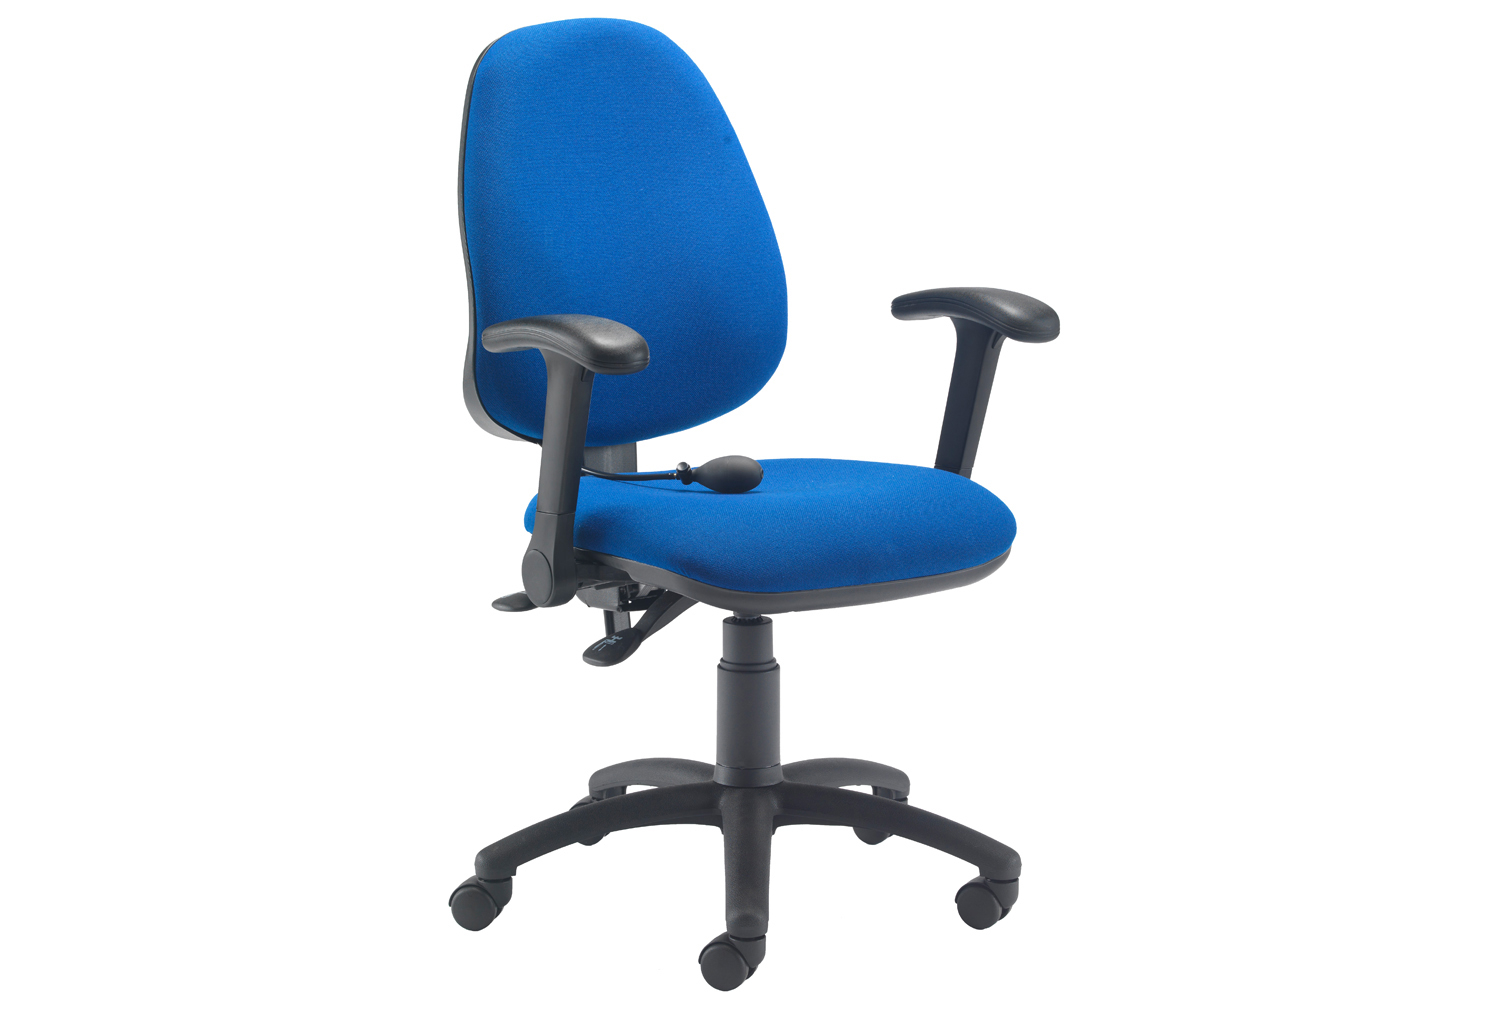 Orchid Lumbar Pump Ergonomic Operator Office Chair With Folding Arms, Blue, Fully Installed